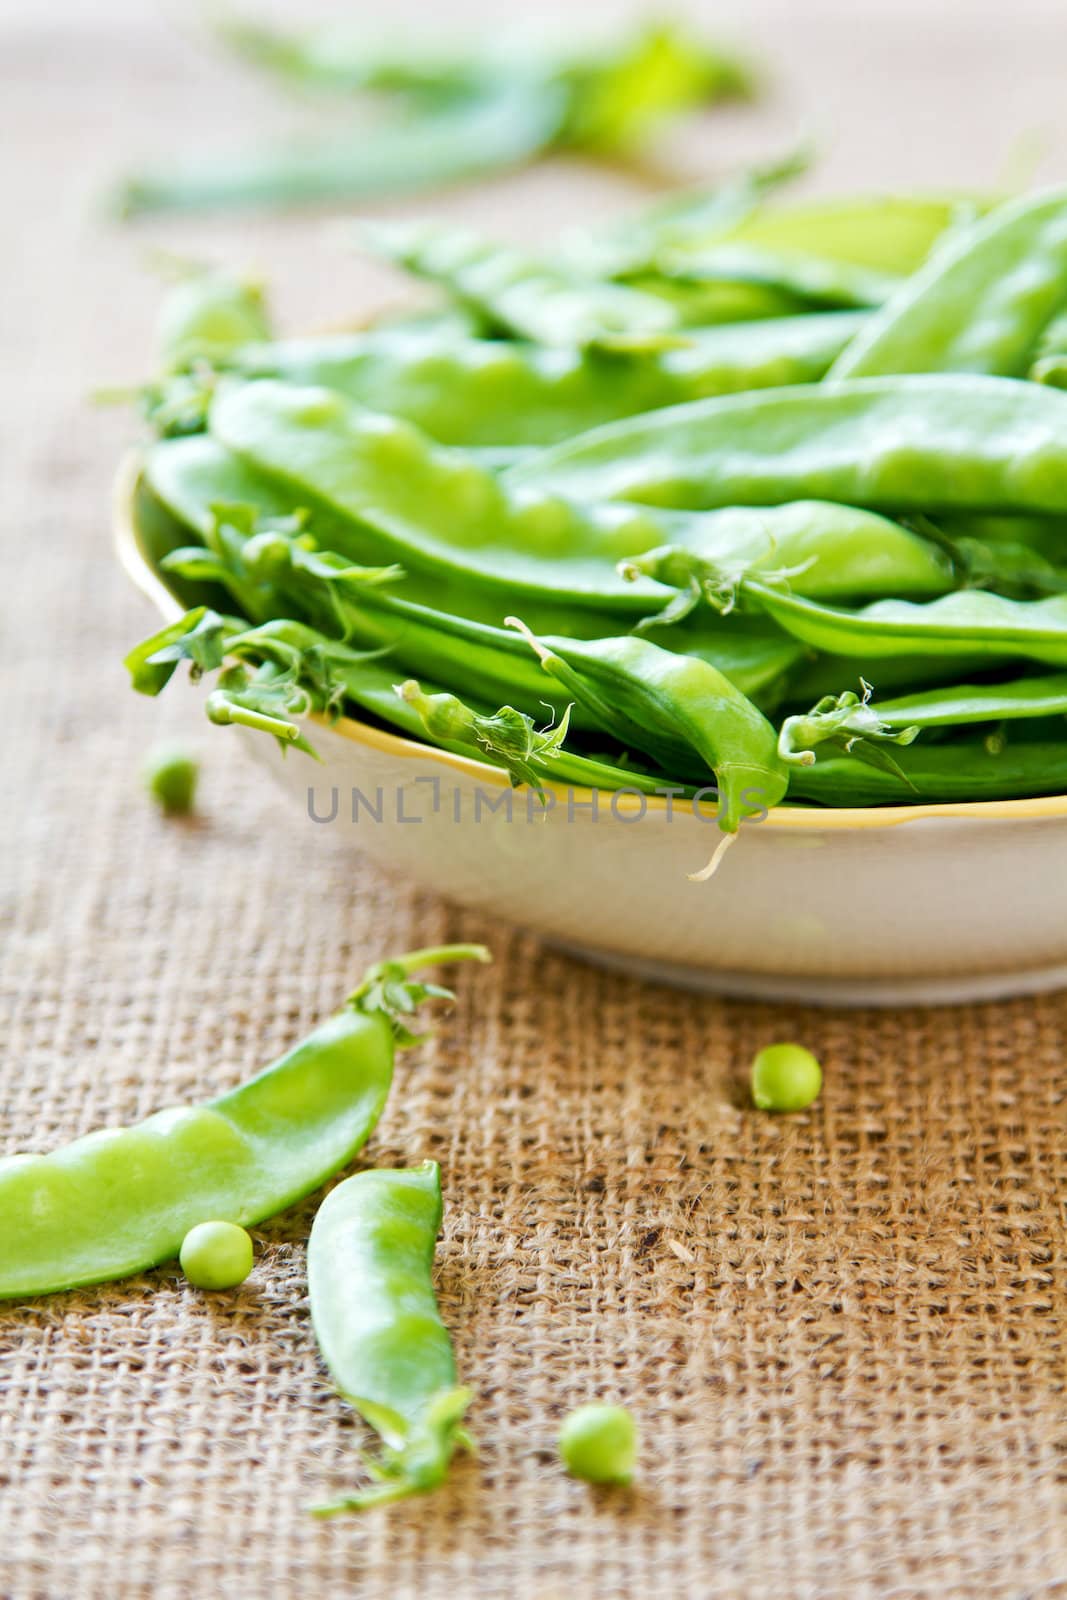 Snow pea by vanillaechoes